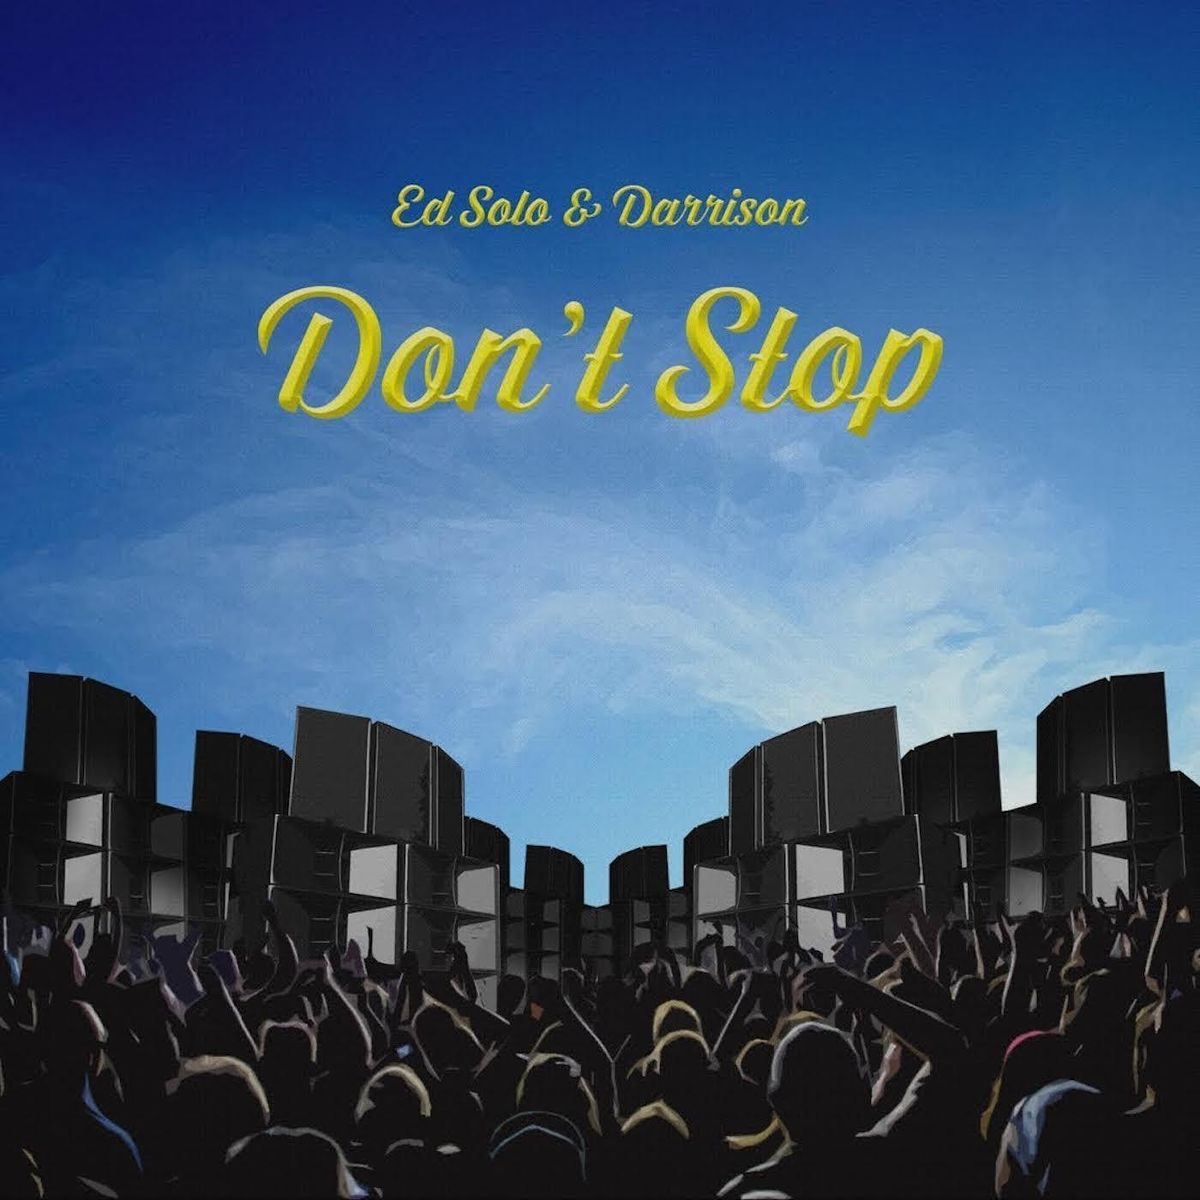 Ed Solo & Darrison — Don't Stop [n/a][n/a](2018)